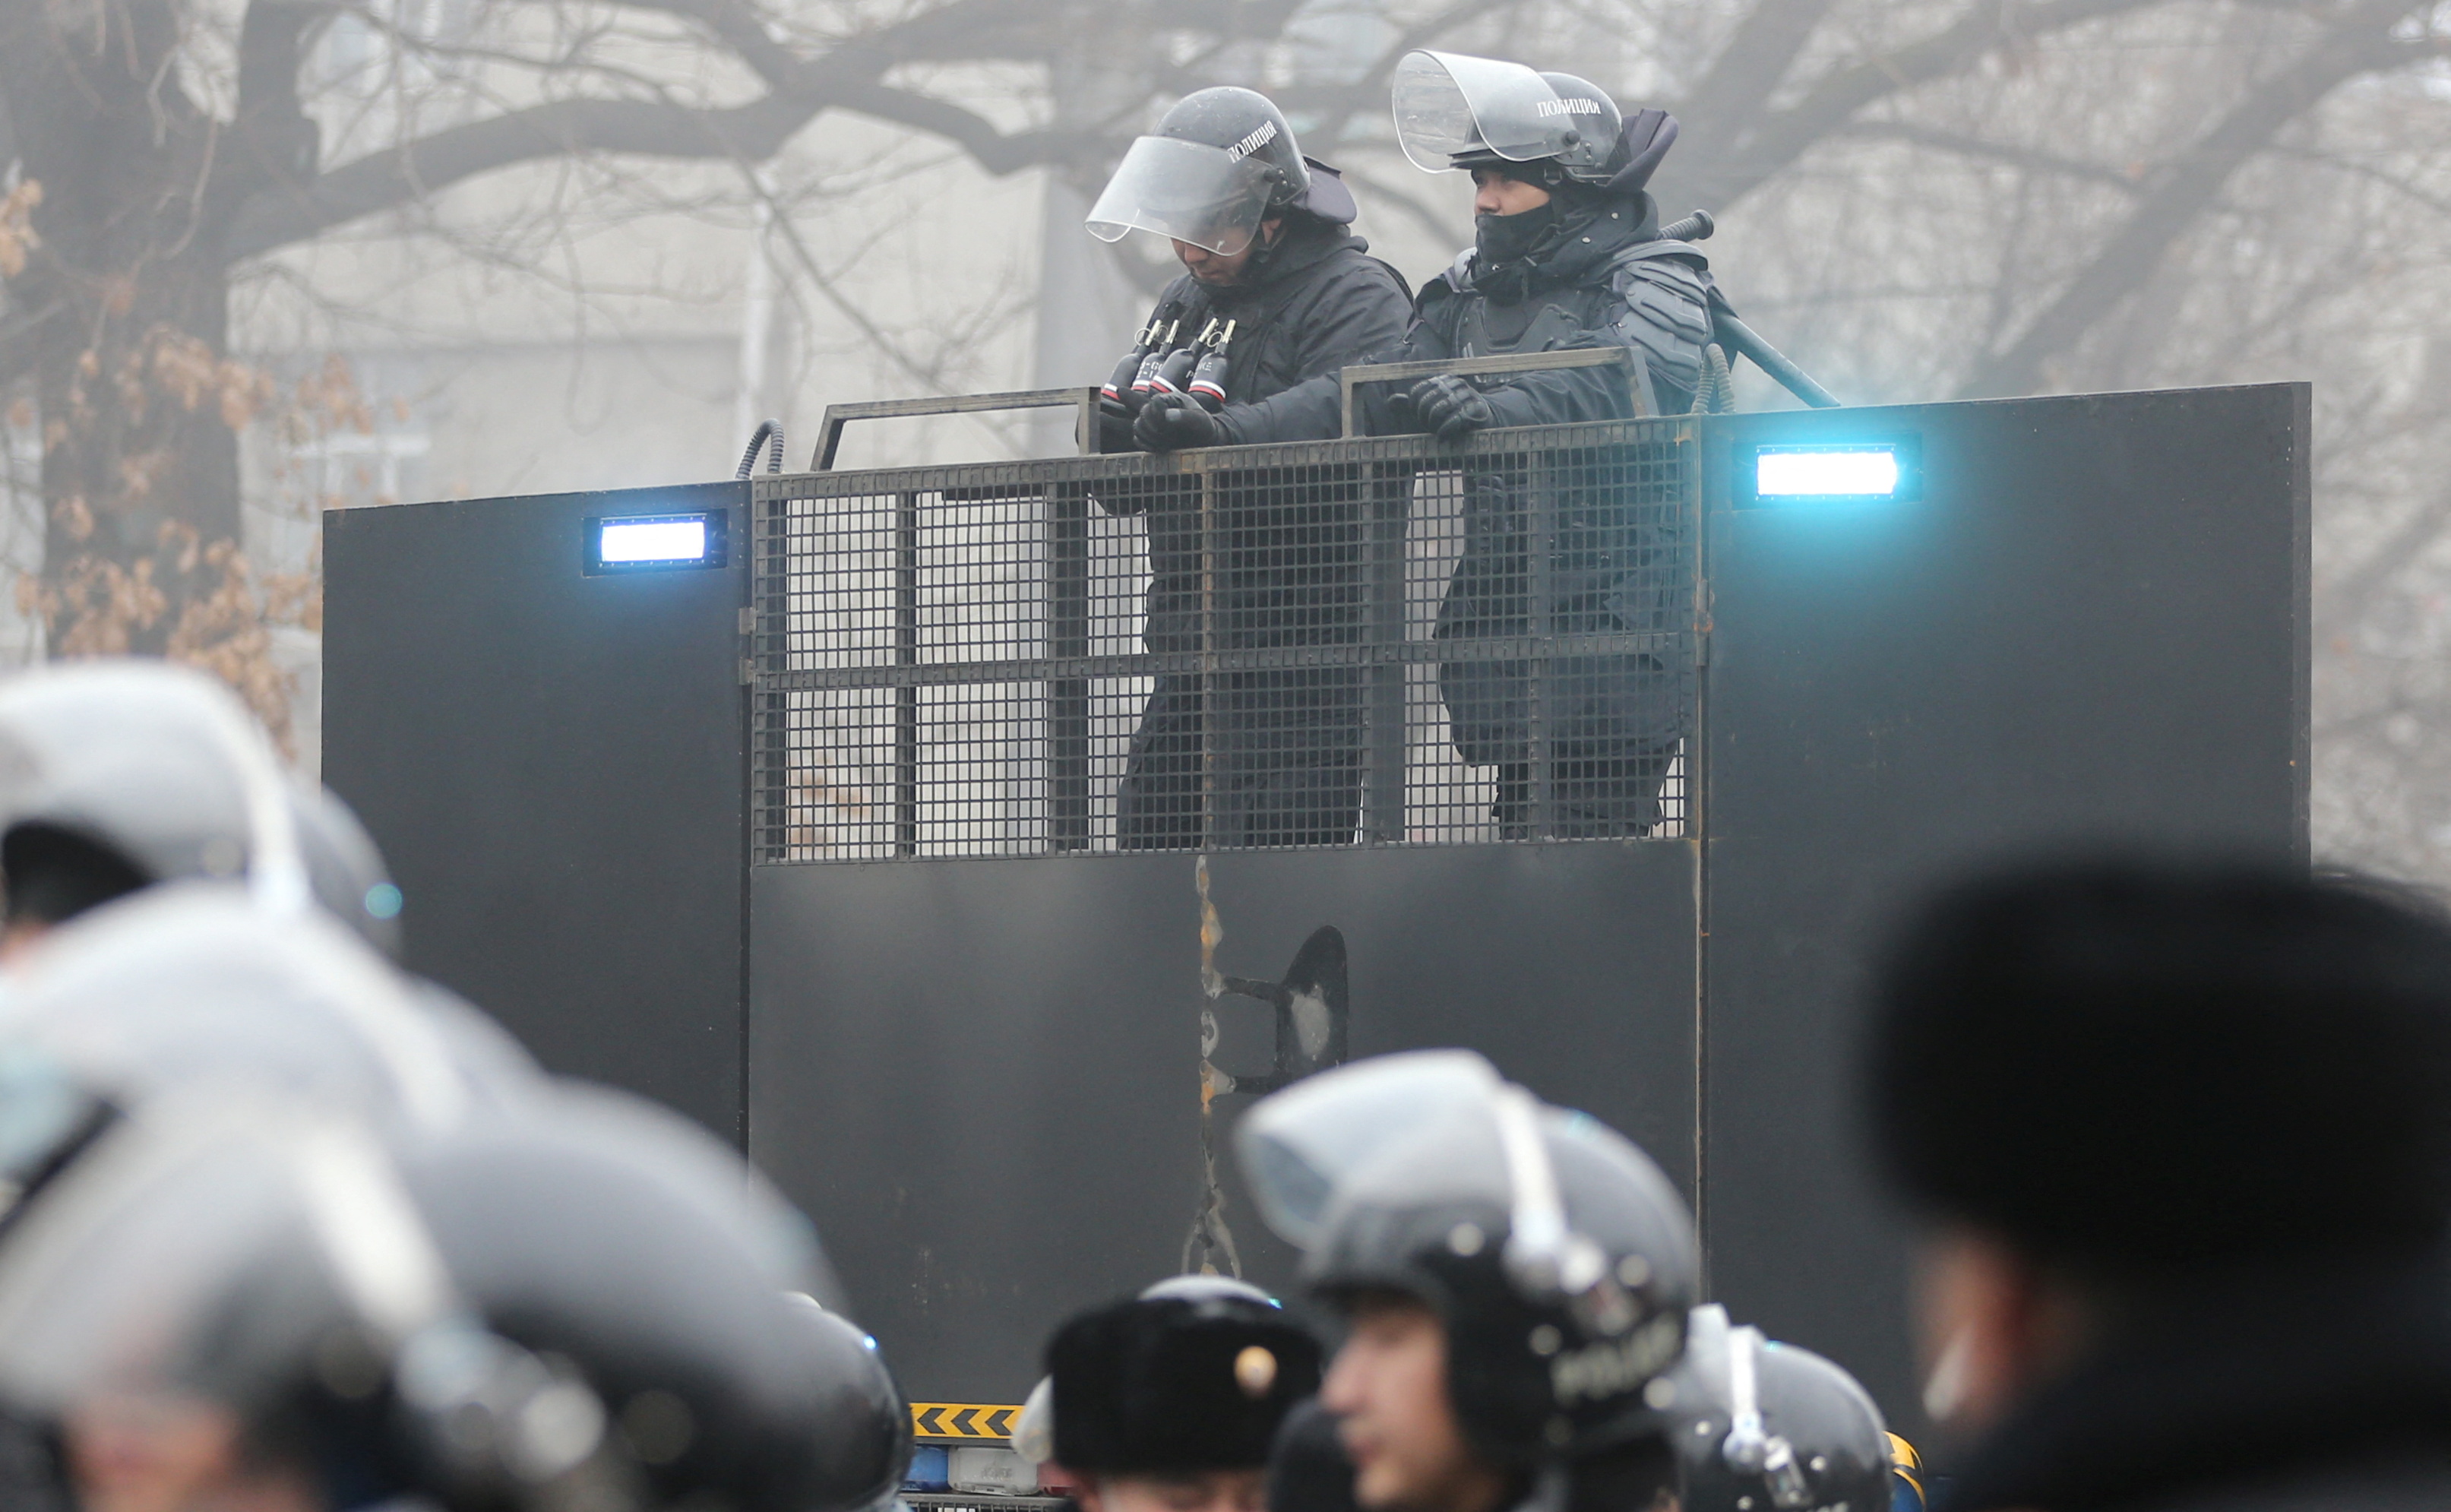 Kazakh law enforcement officers are seen on a barricade during a protest triggered by fuel price increase in Almaty, Kazakhstan January 5, 2022.